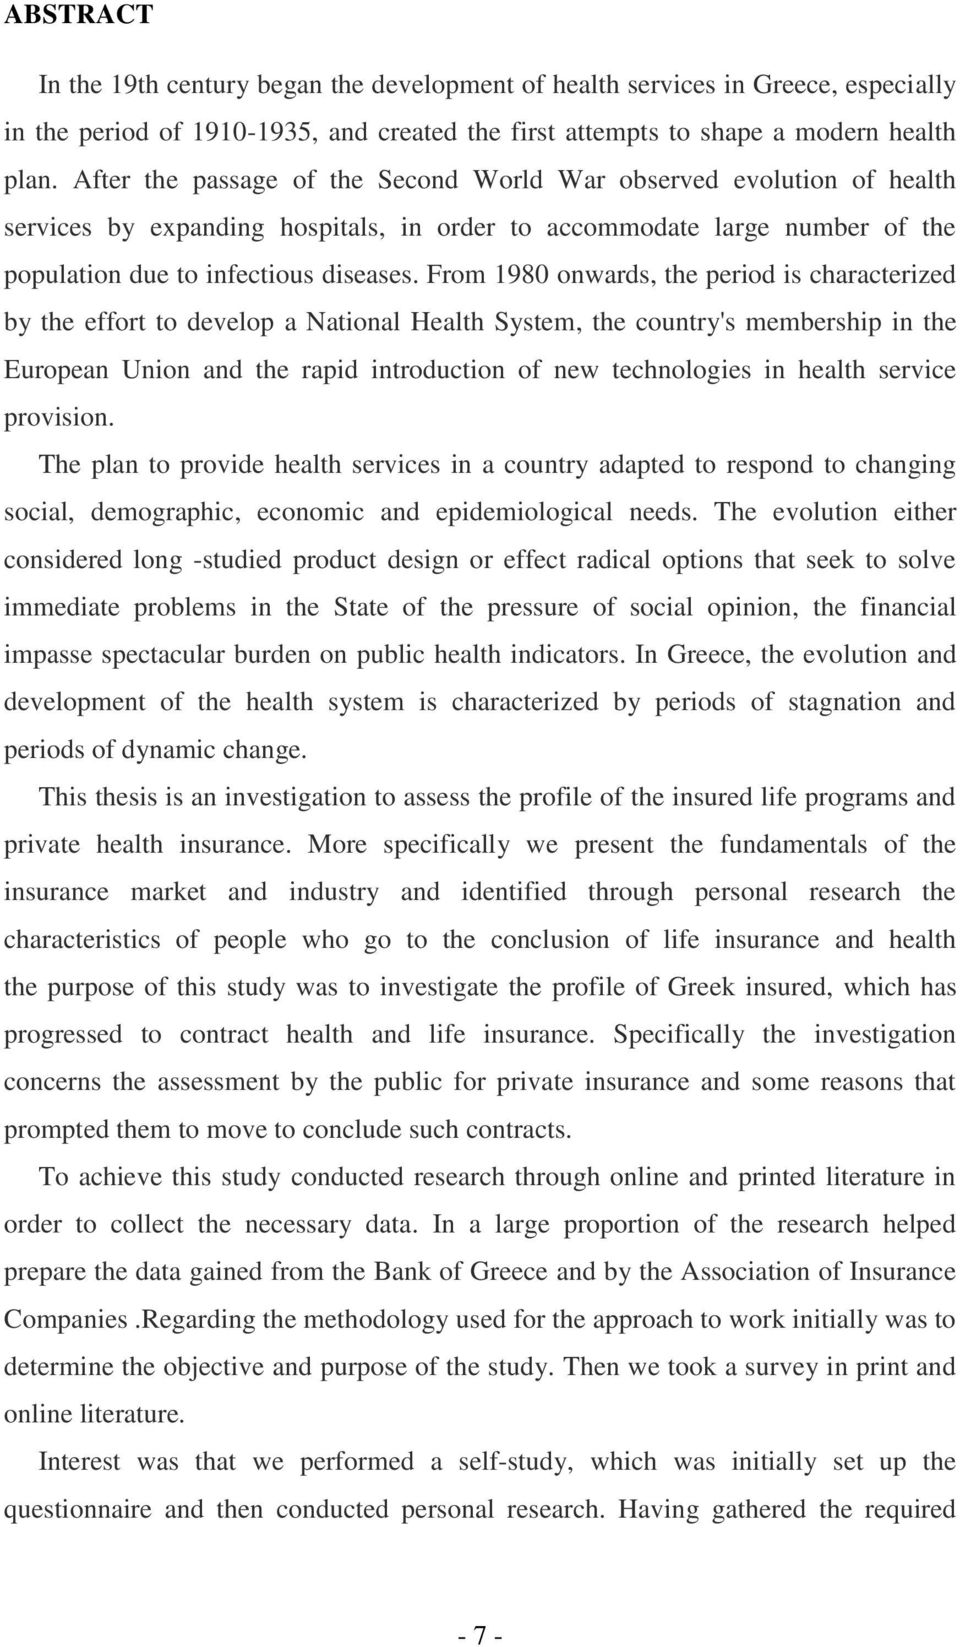 From 1980 onwards, the period is characterized by the effort to develop a National Health System, the country's membership in the European Union and the rapid introduction of new technologies in